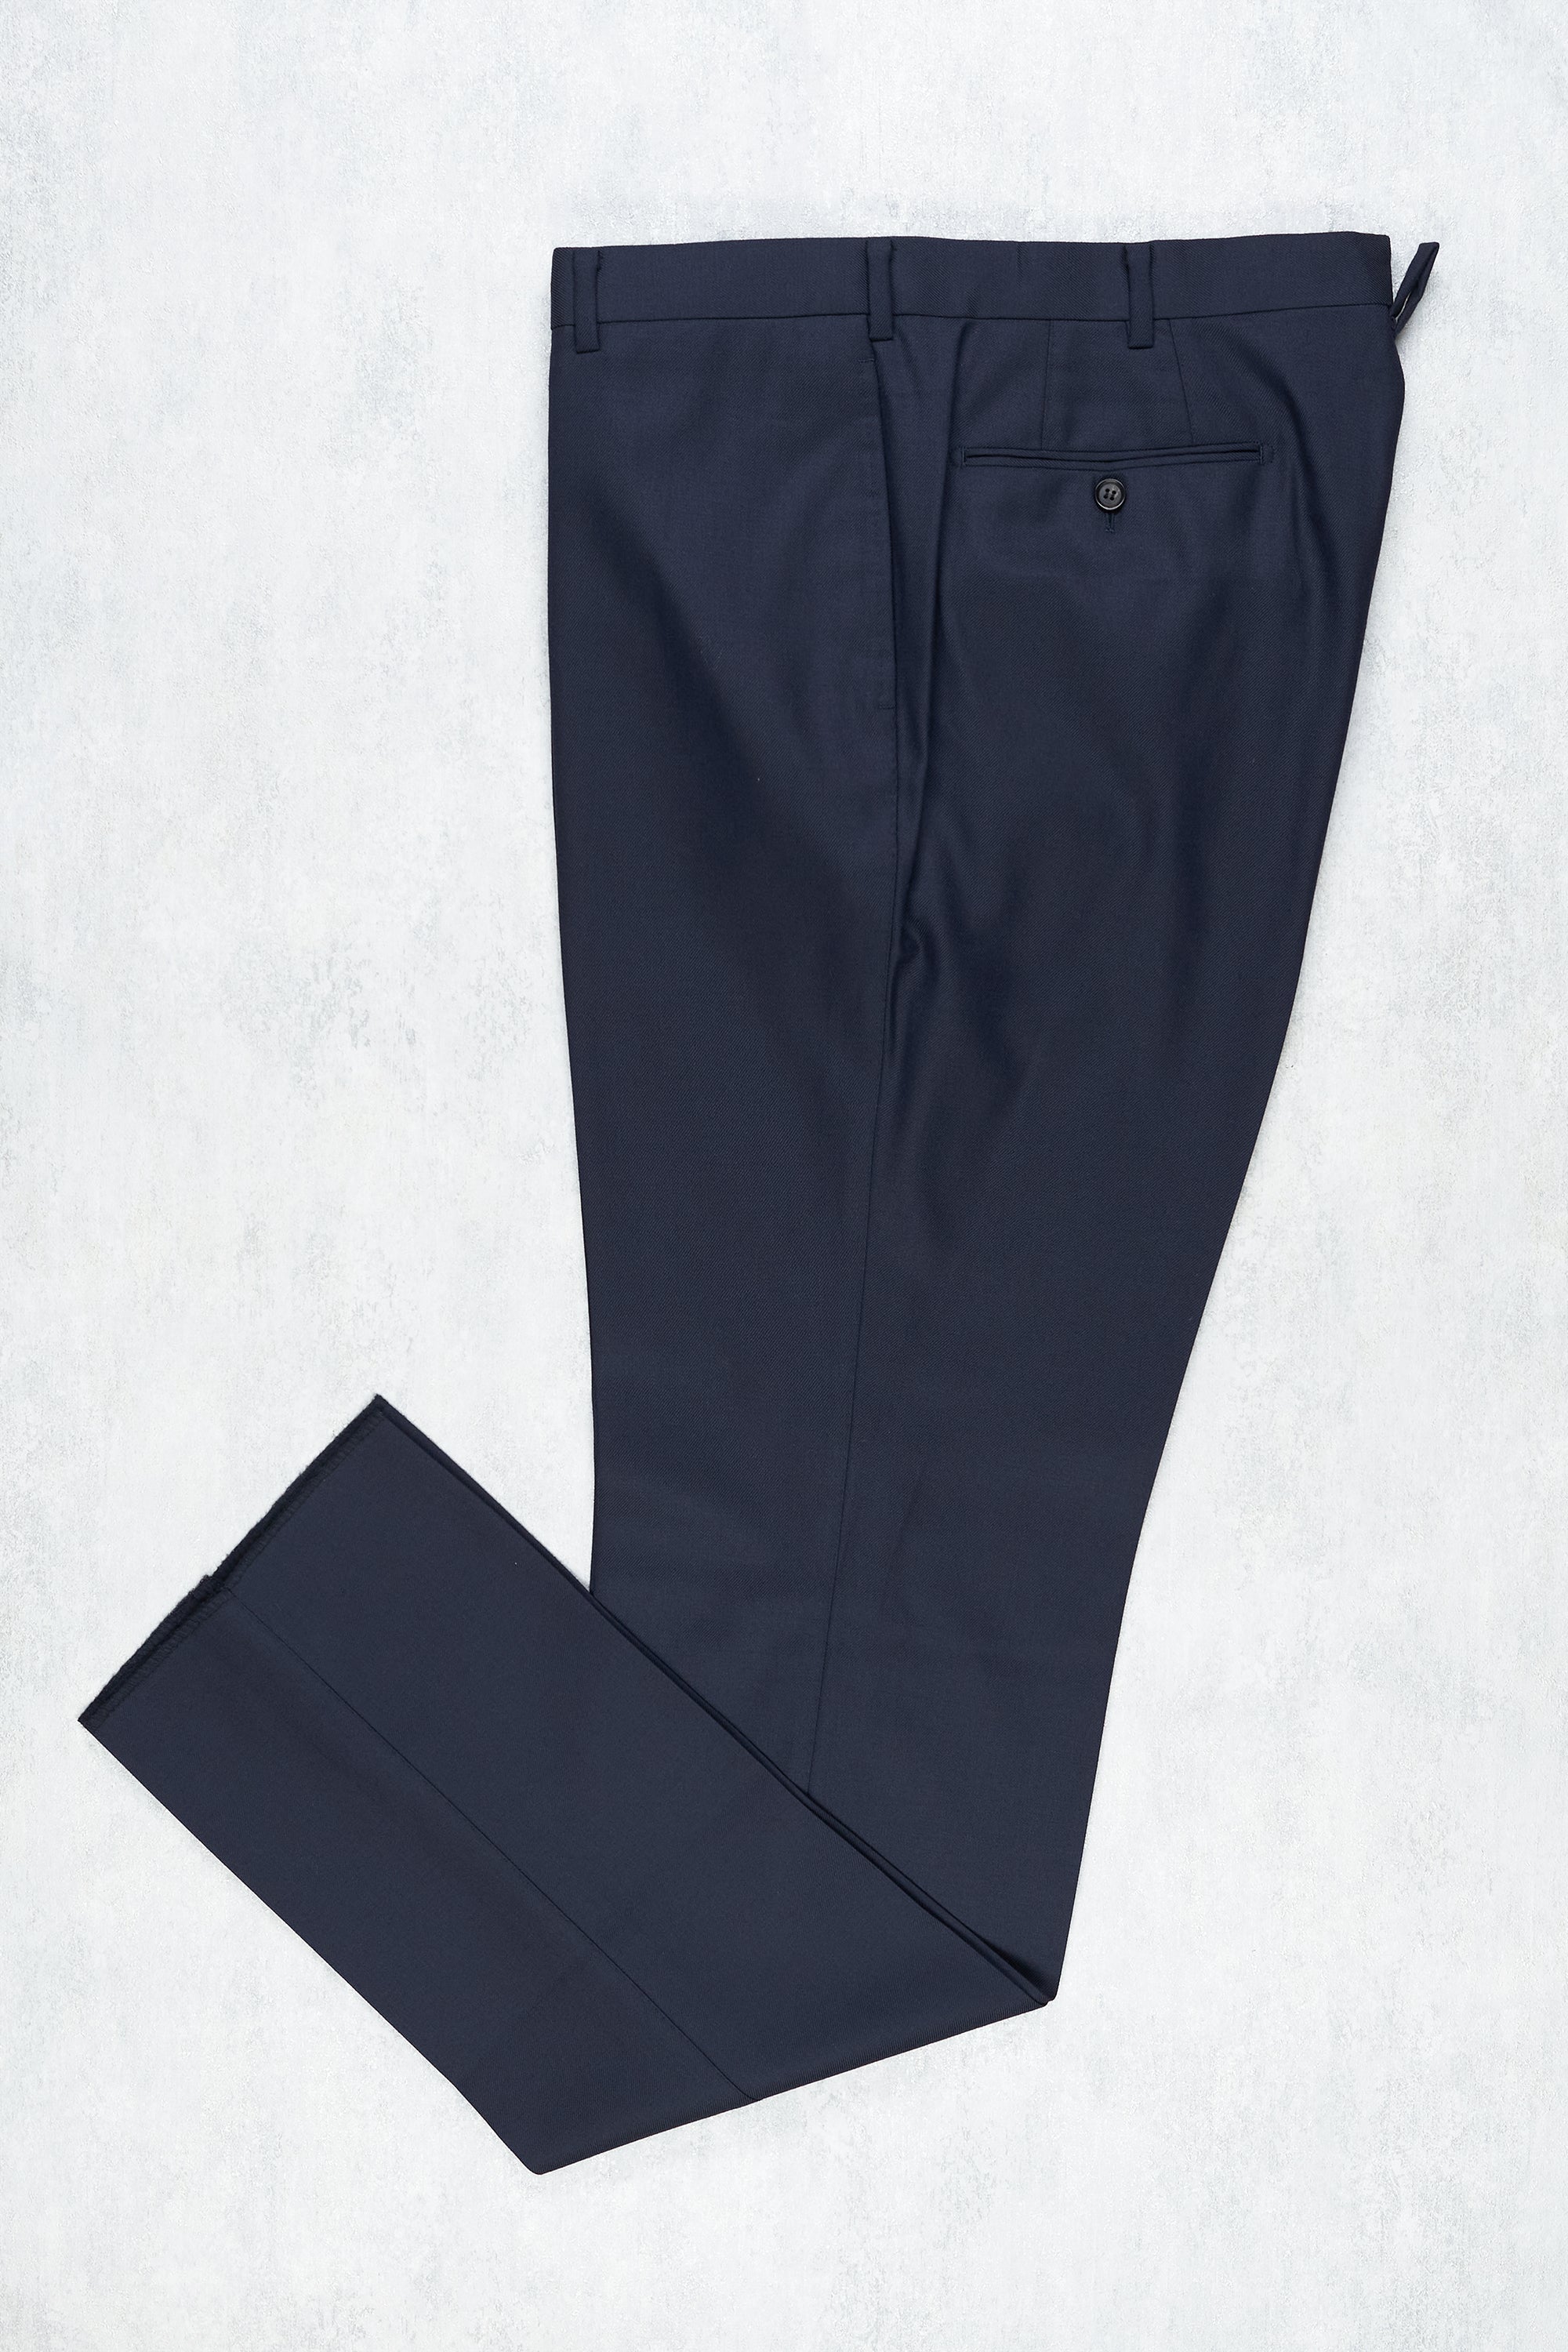 Ring Jacket AMP01 Navy Wool Trousers